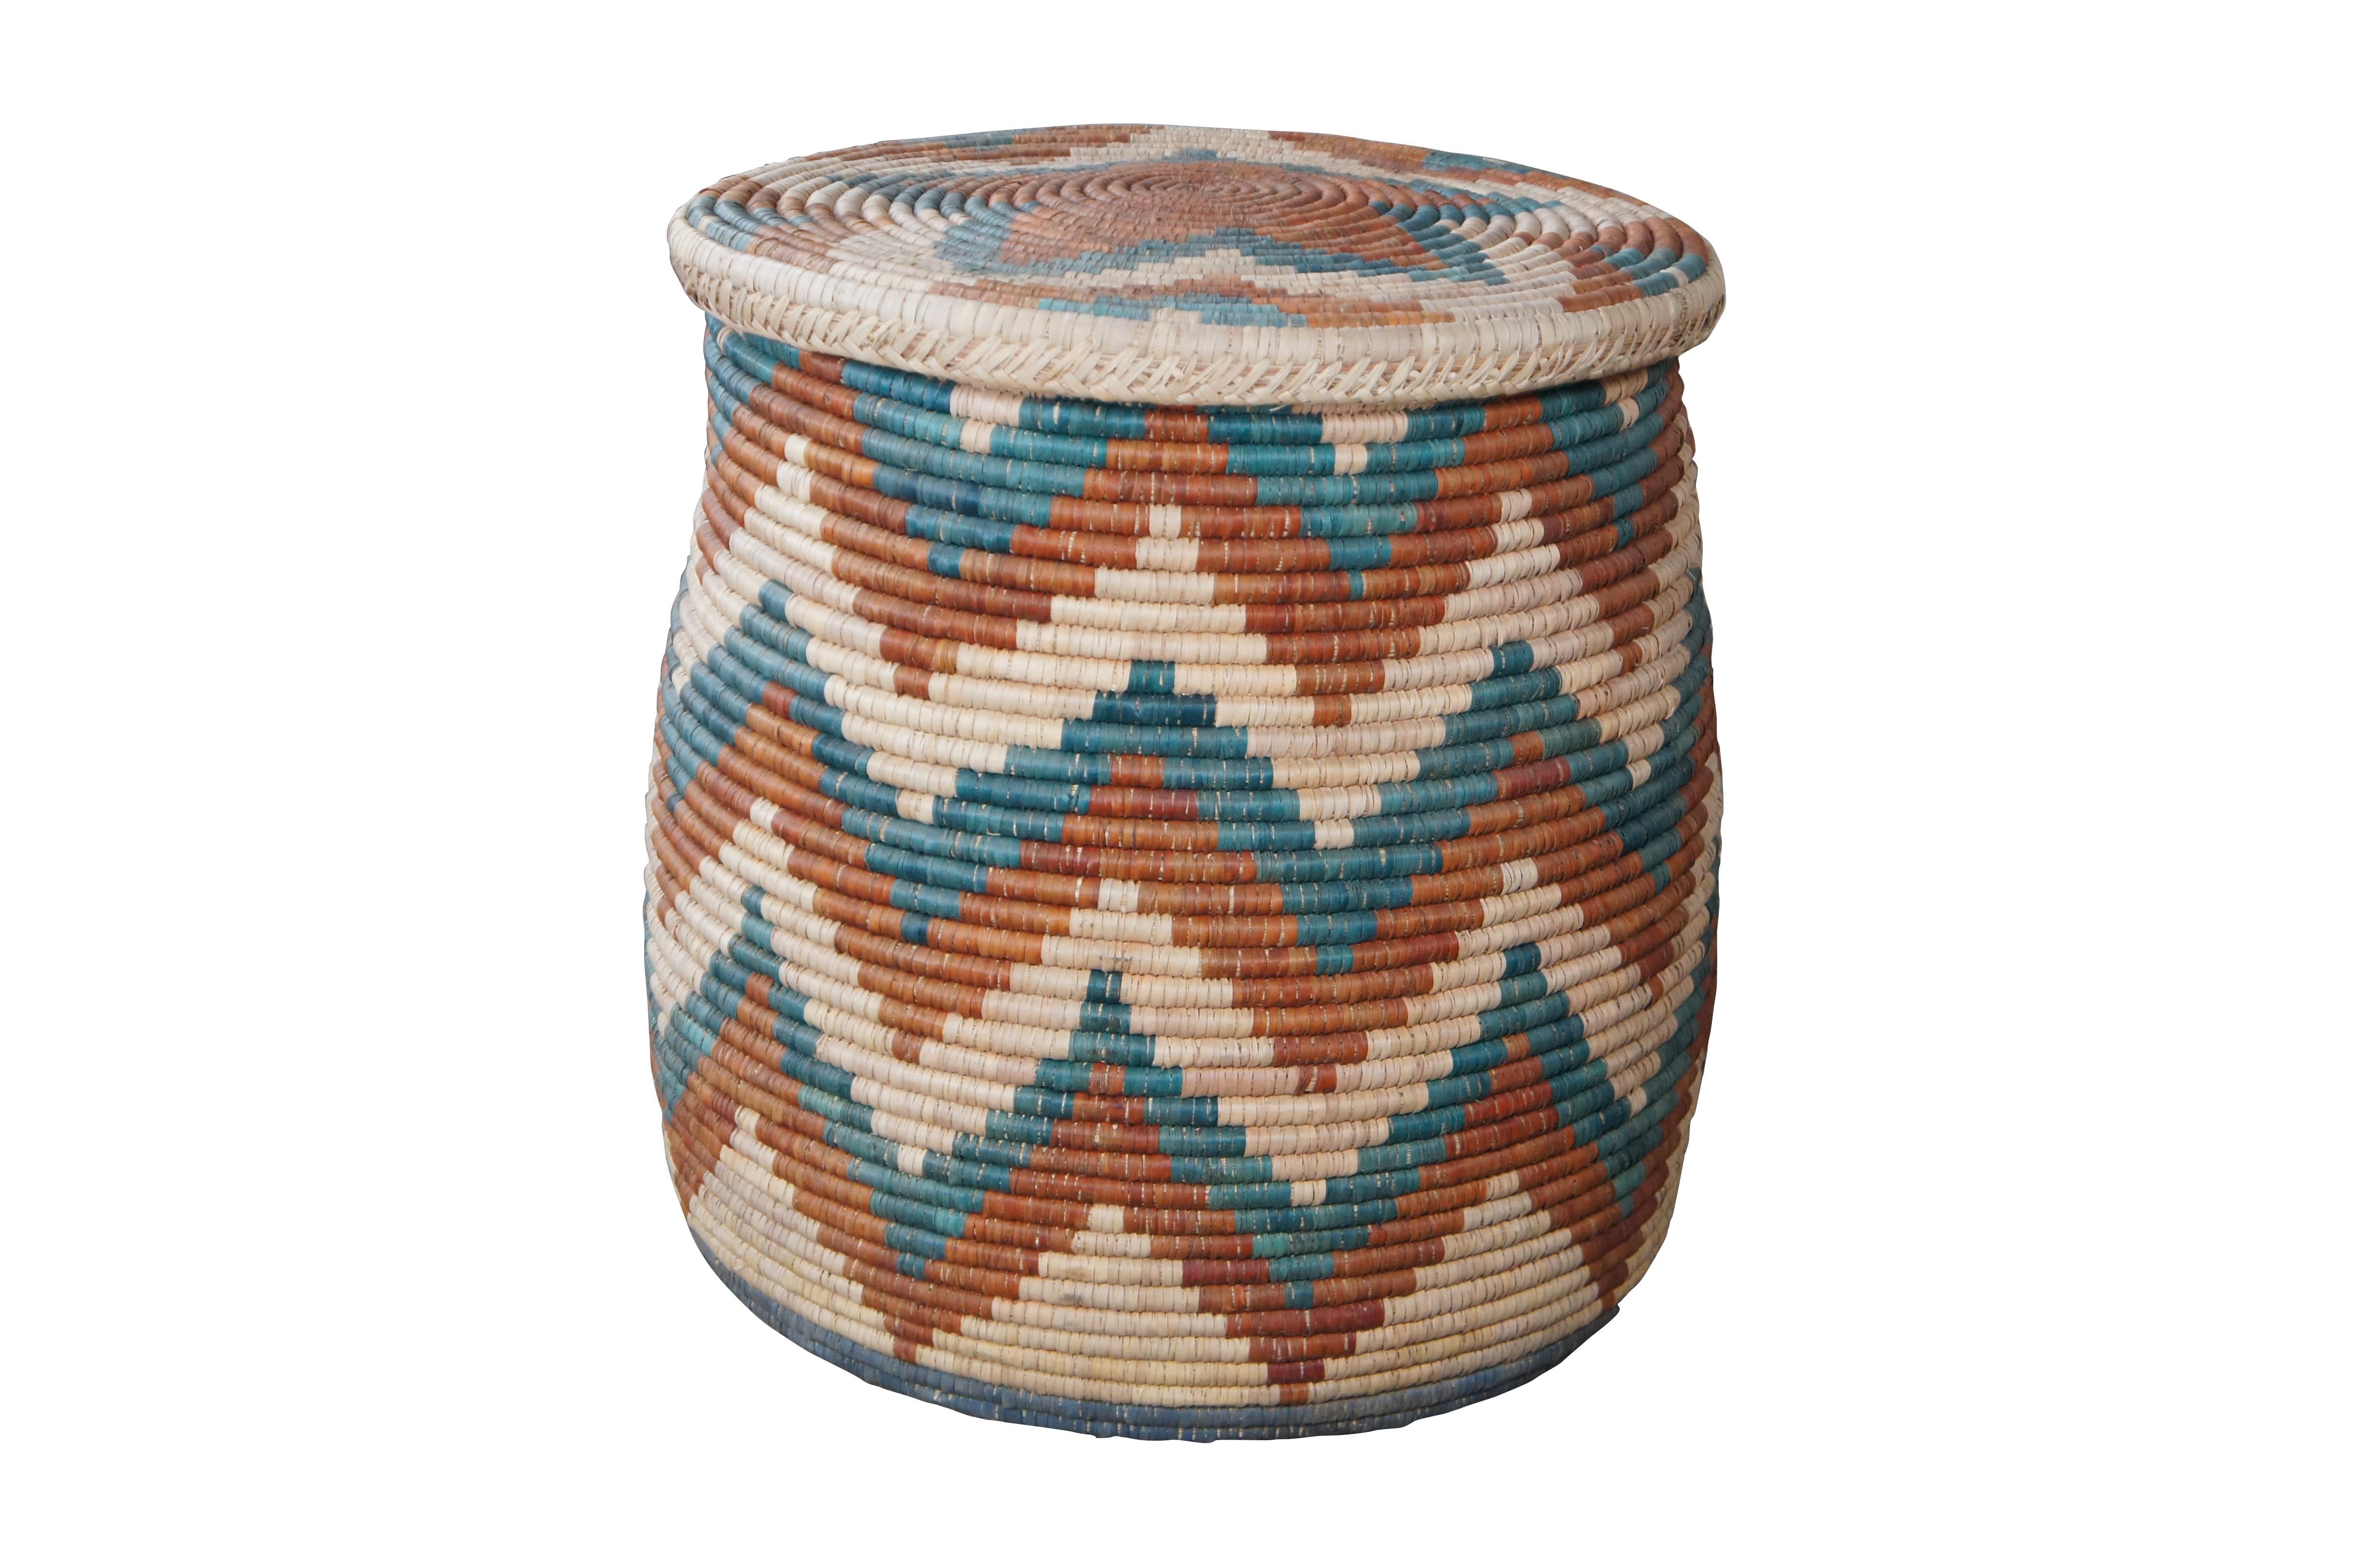 Hand Woven wicker basket or side table. Made from wicker with a green, red and tan zig-zag pattern. The basket is lidded making it perfect for use as a side table with interior storage.

Dimensions:
22